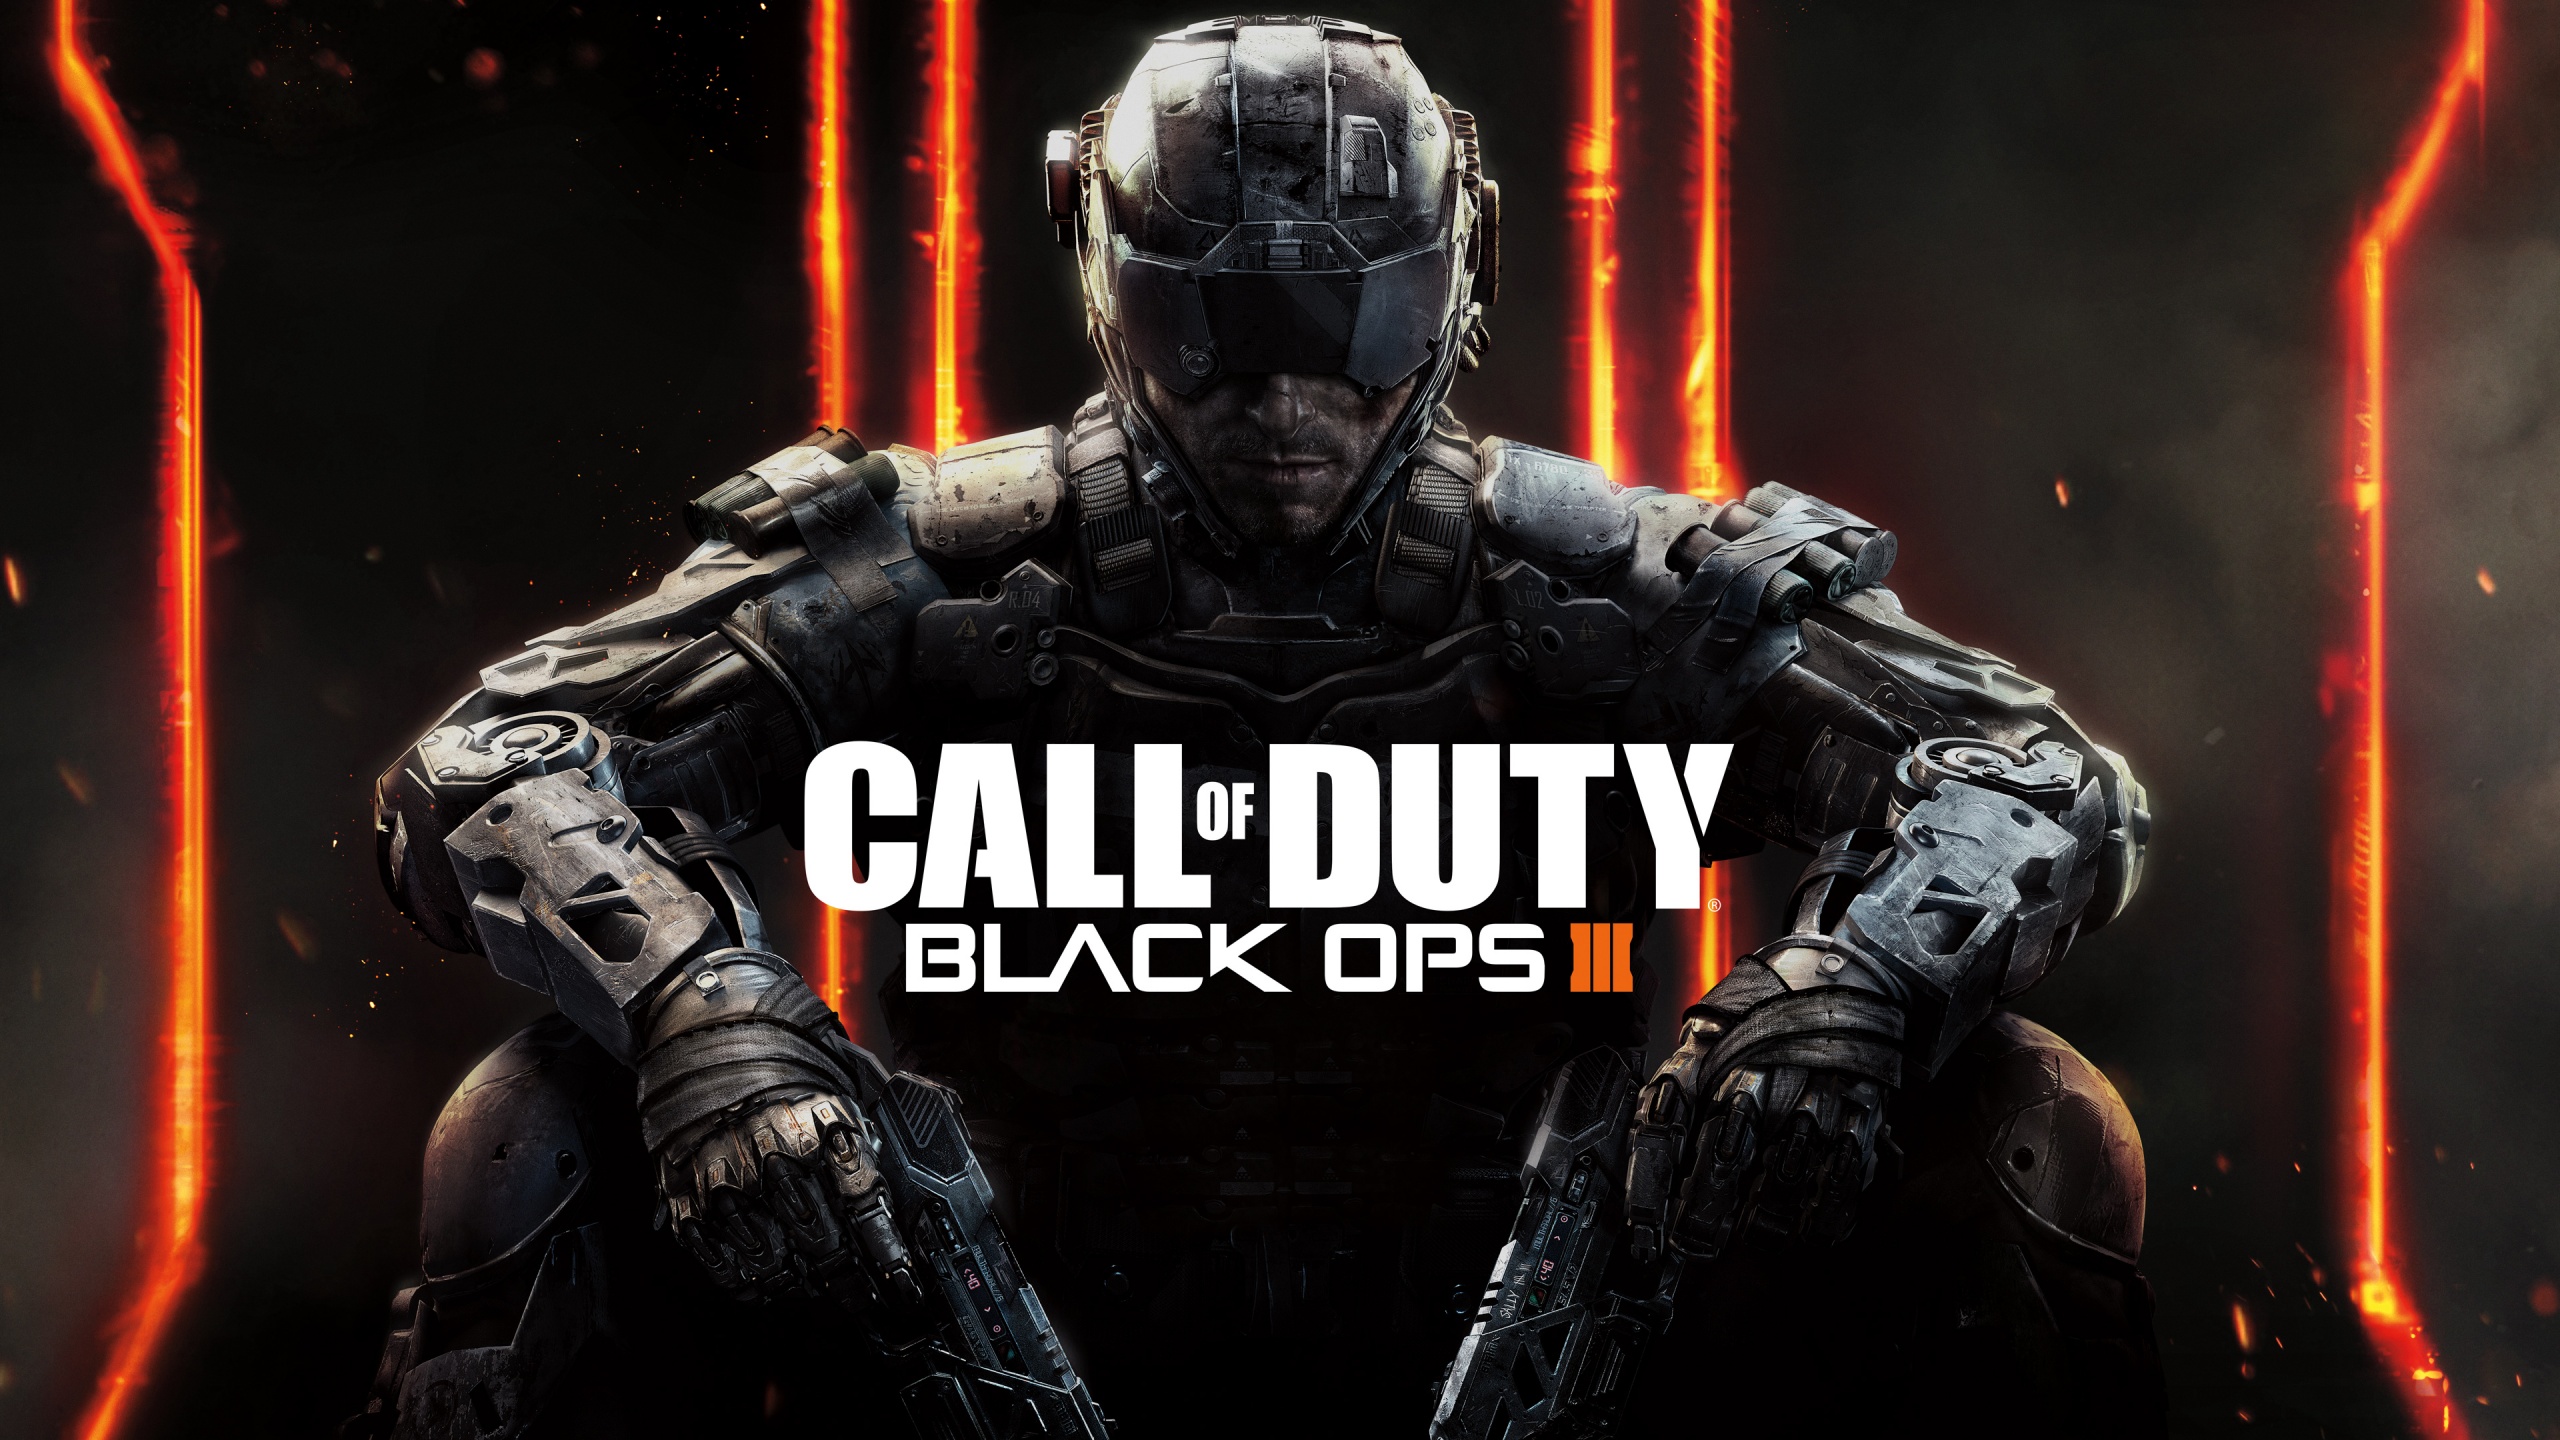 Call of Duty Black Ops III Wallpapers HD Wallpapers